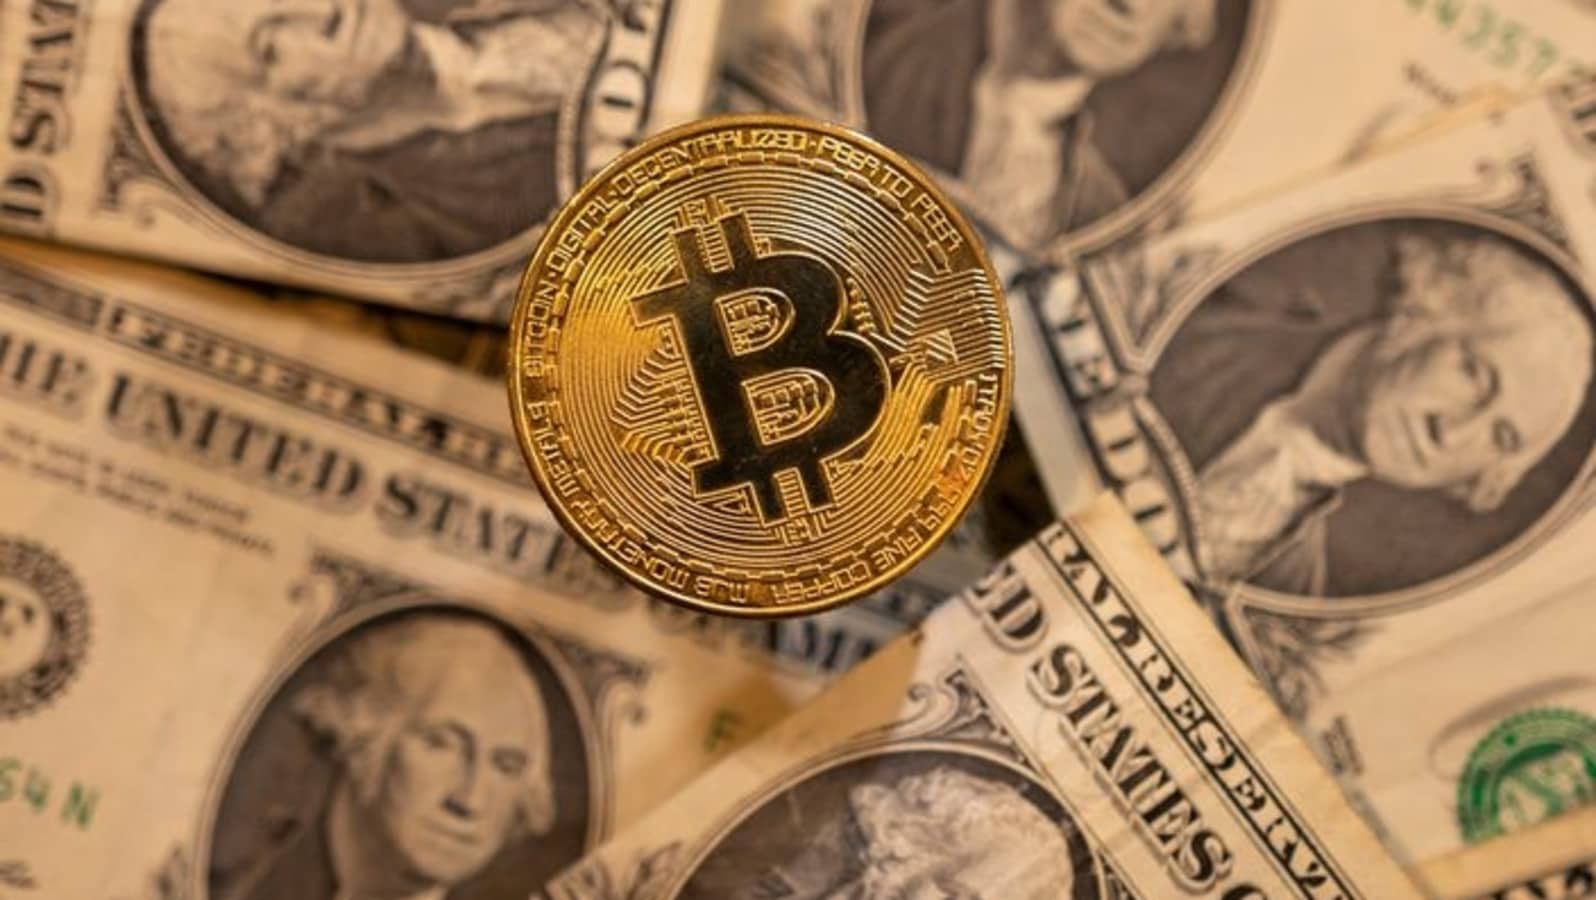 For cryptocurrency fans, Bitcoin is the best store of value, but is it all a bubble?